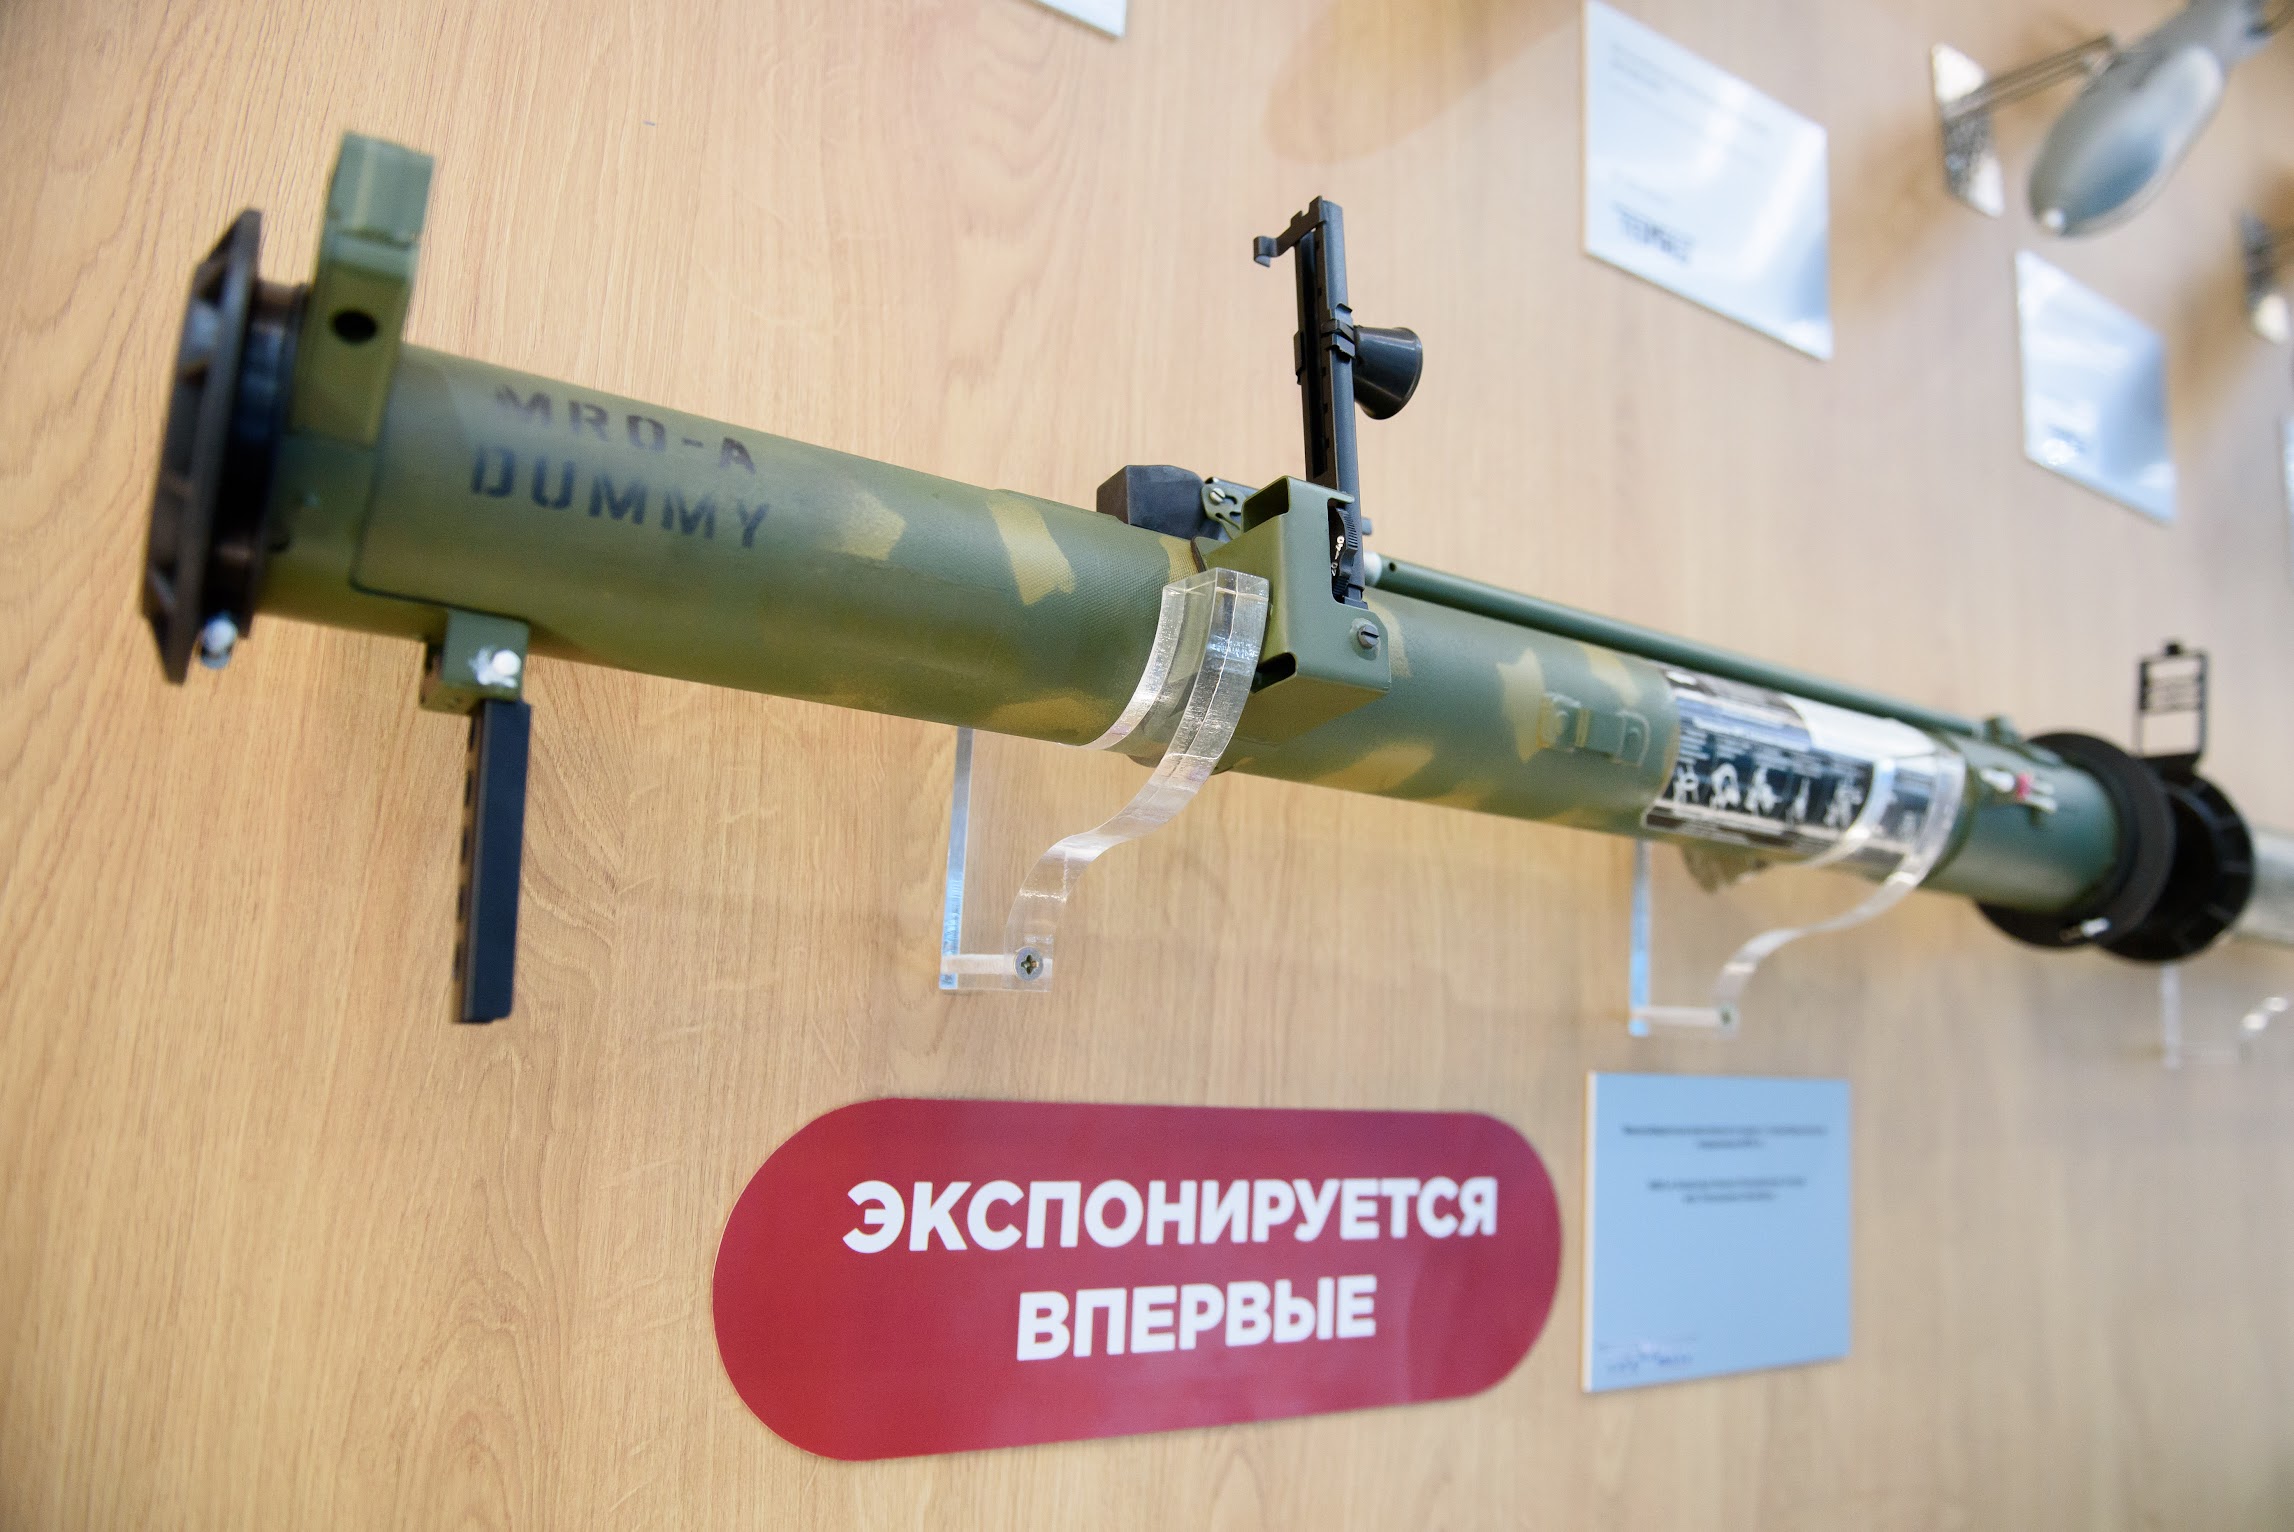 Rostec is to Showcase a Cutting-Edge Small-Size Rocket Flamethrower at MILEX-2023 for the First Time